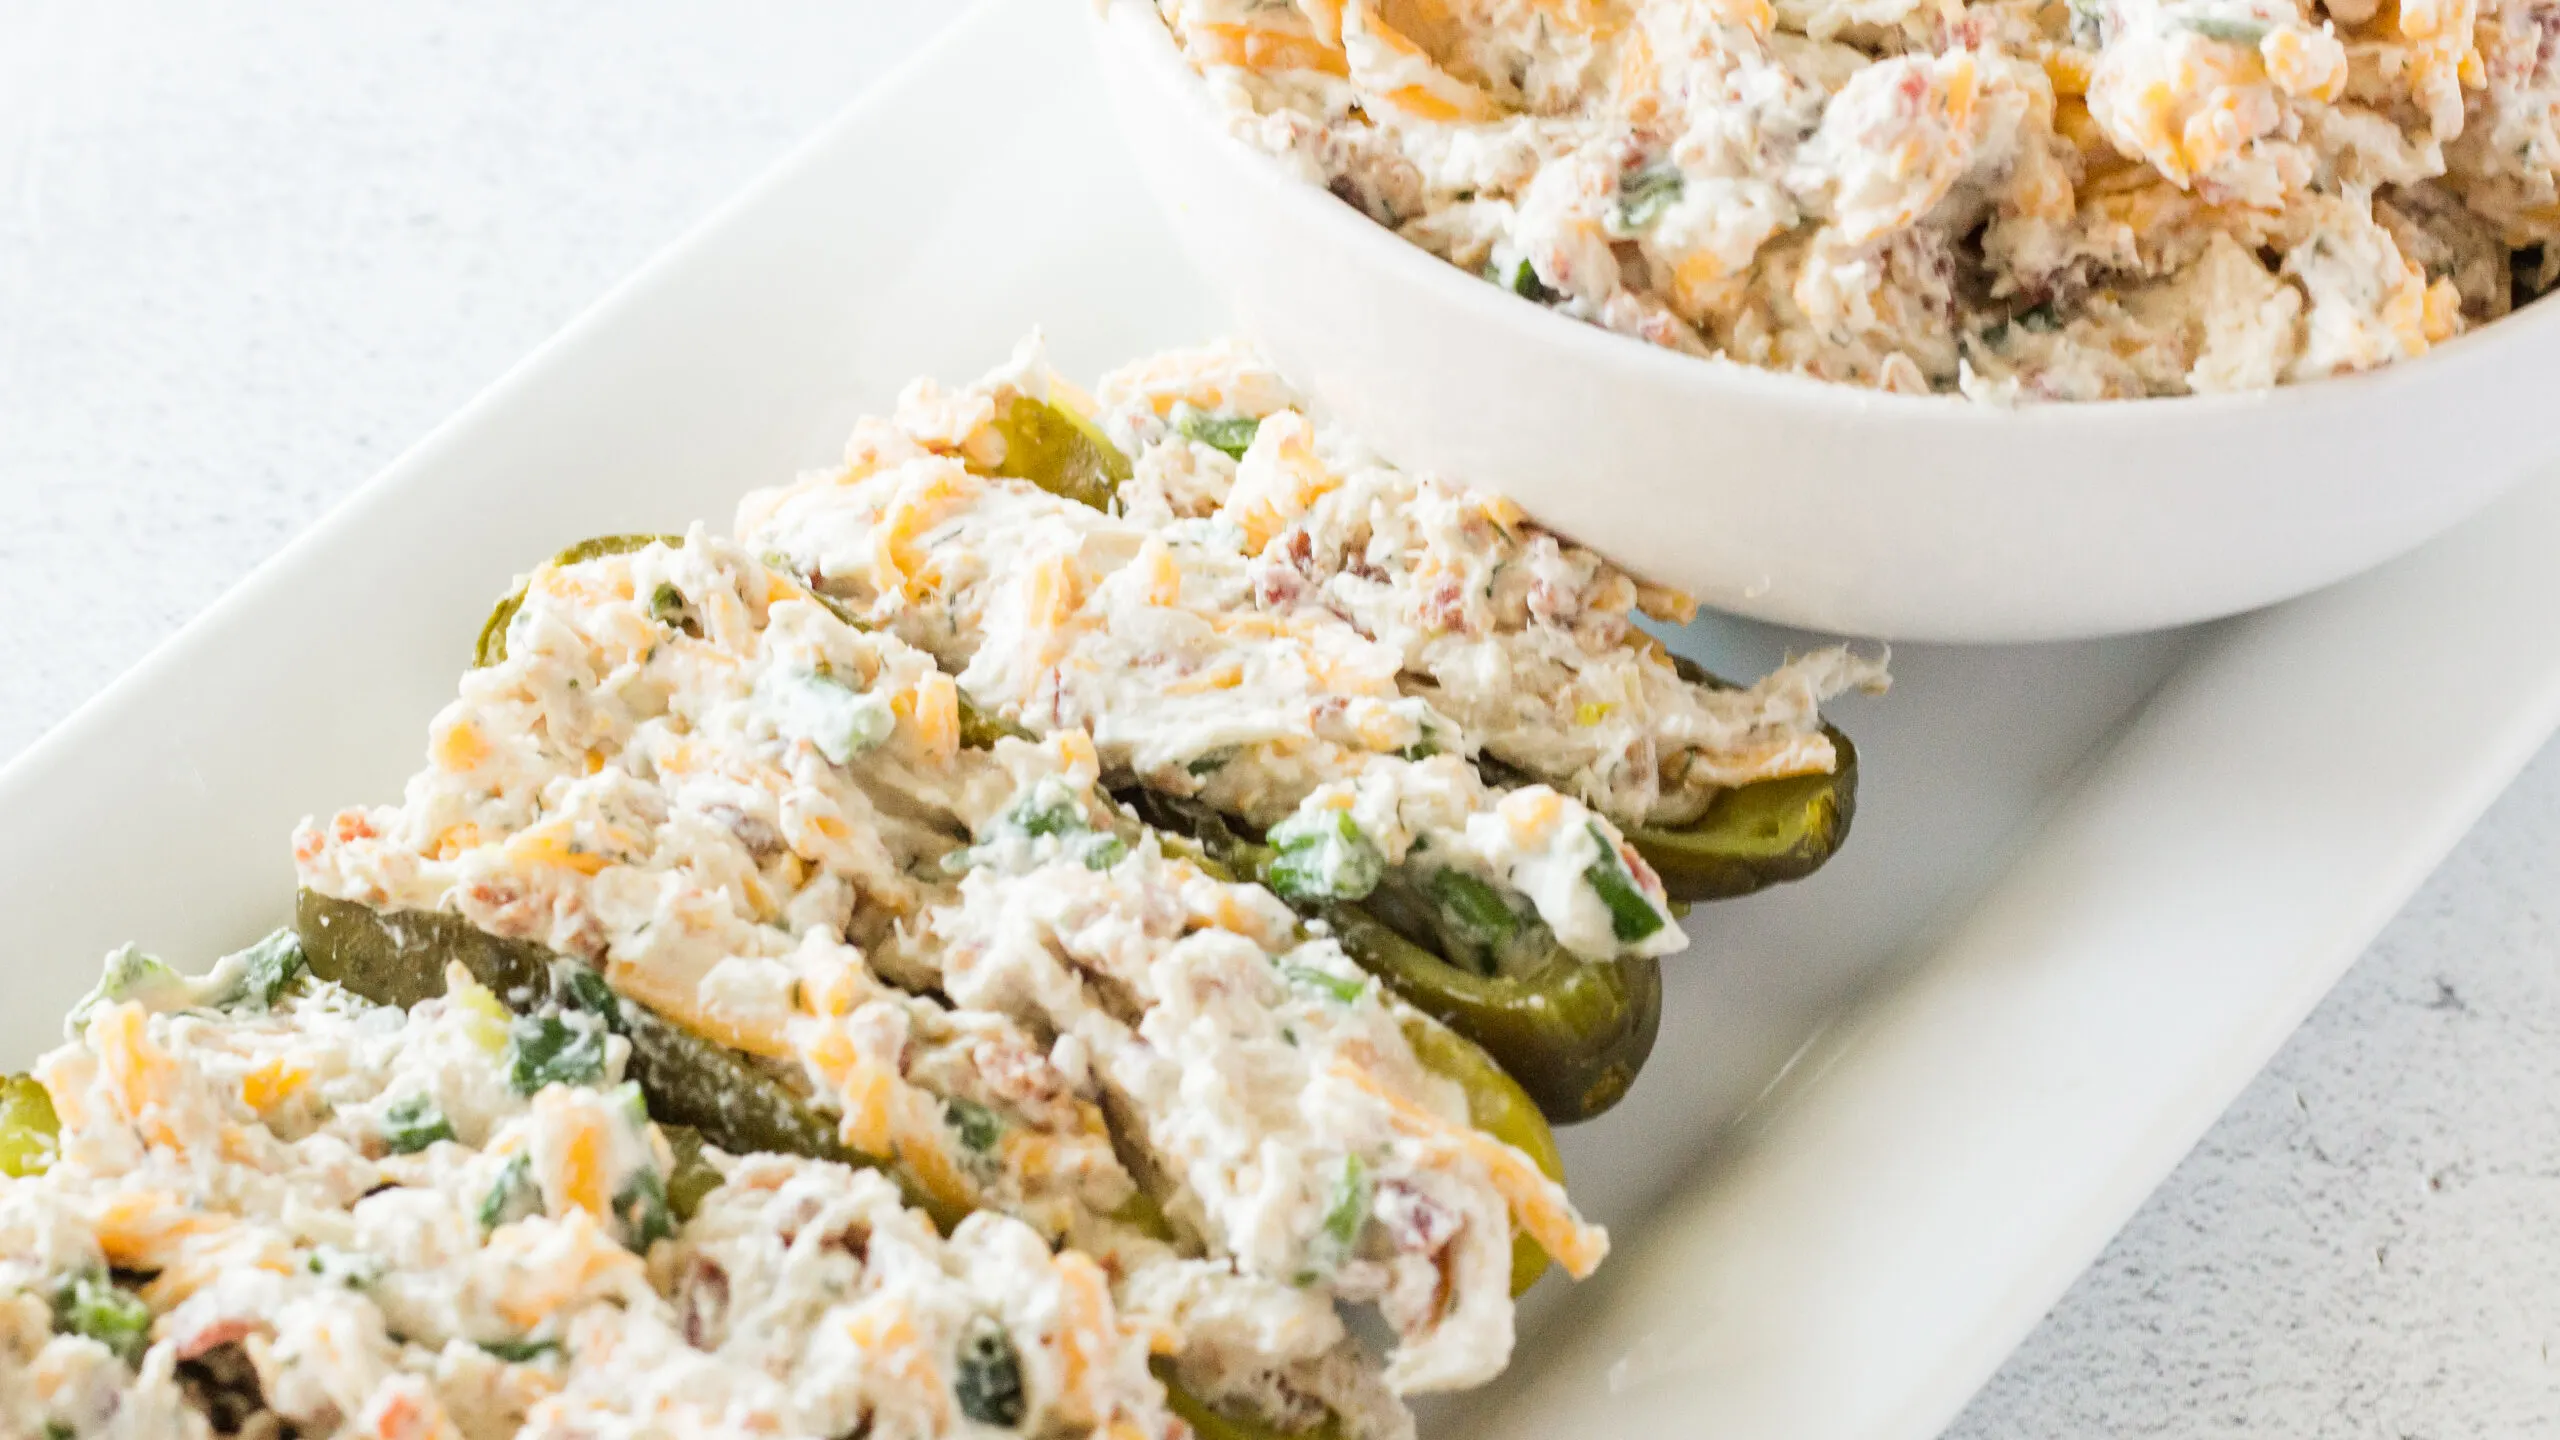 Loaded Chicken Salad Pickle Boats